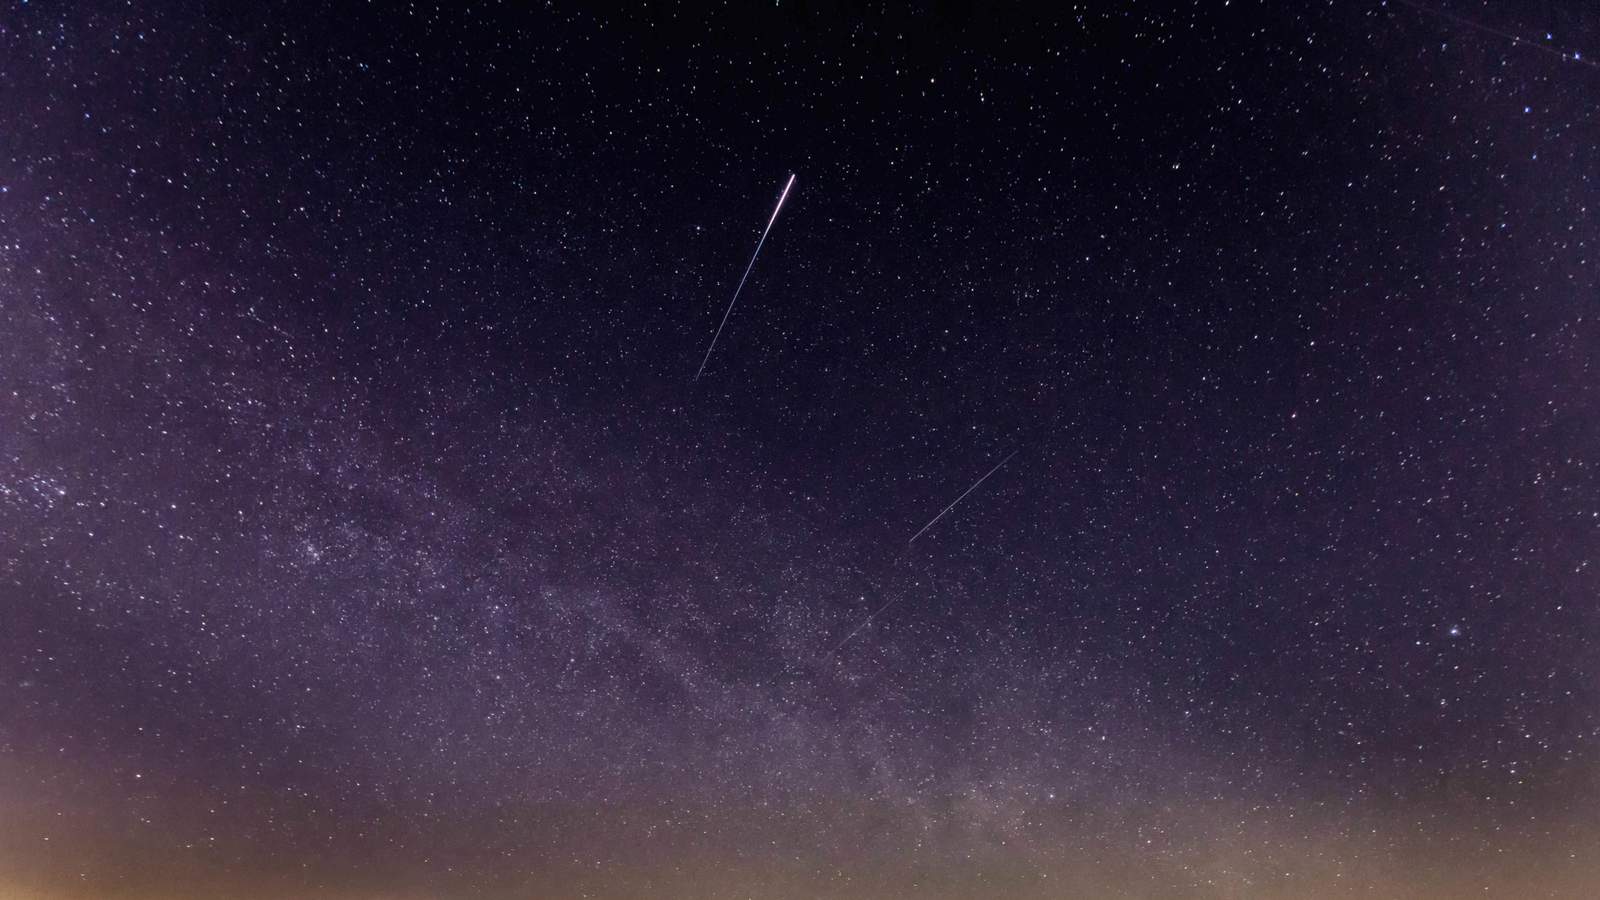 Watch the sky on Monday for the first meteor shower of 2021